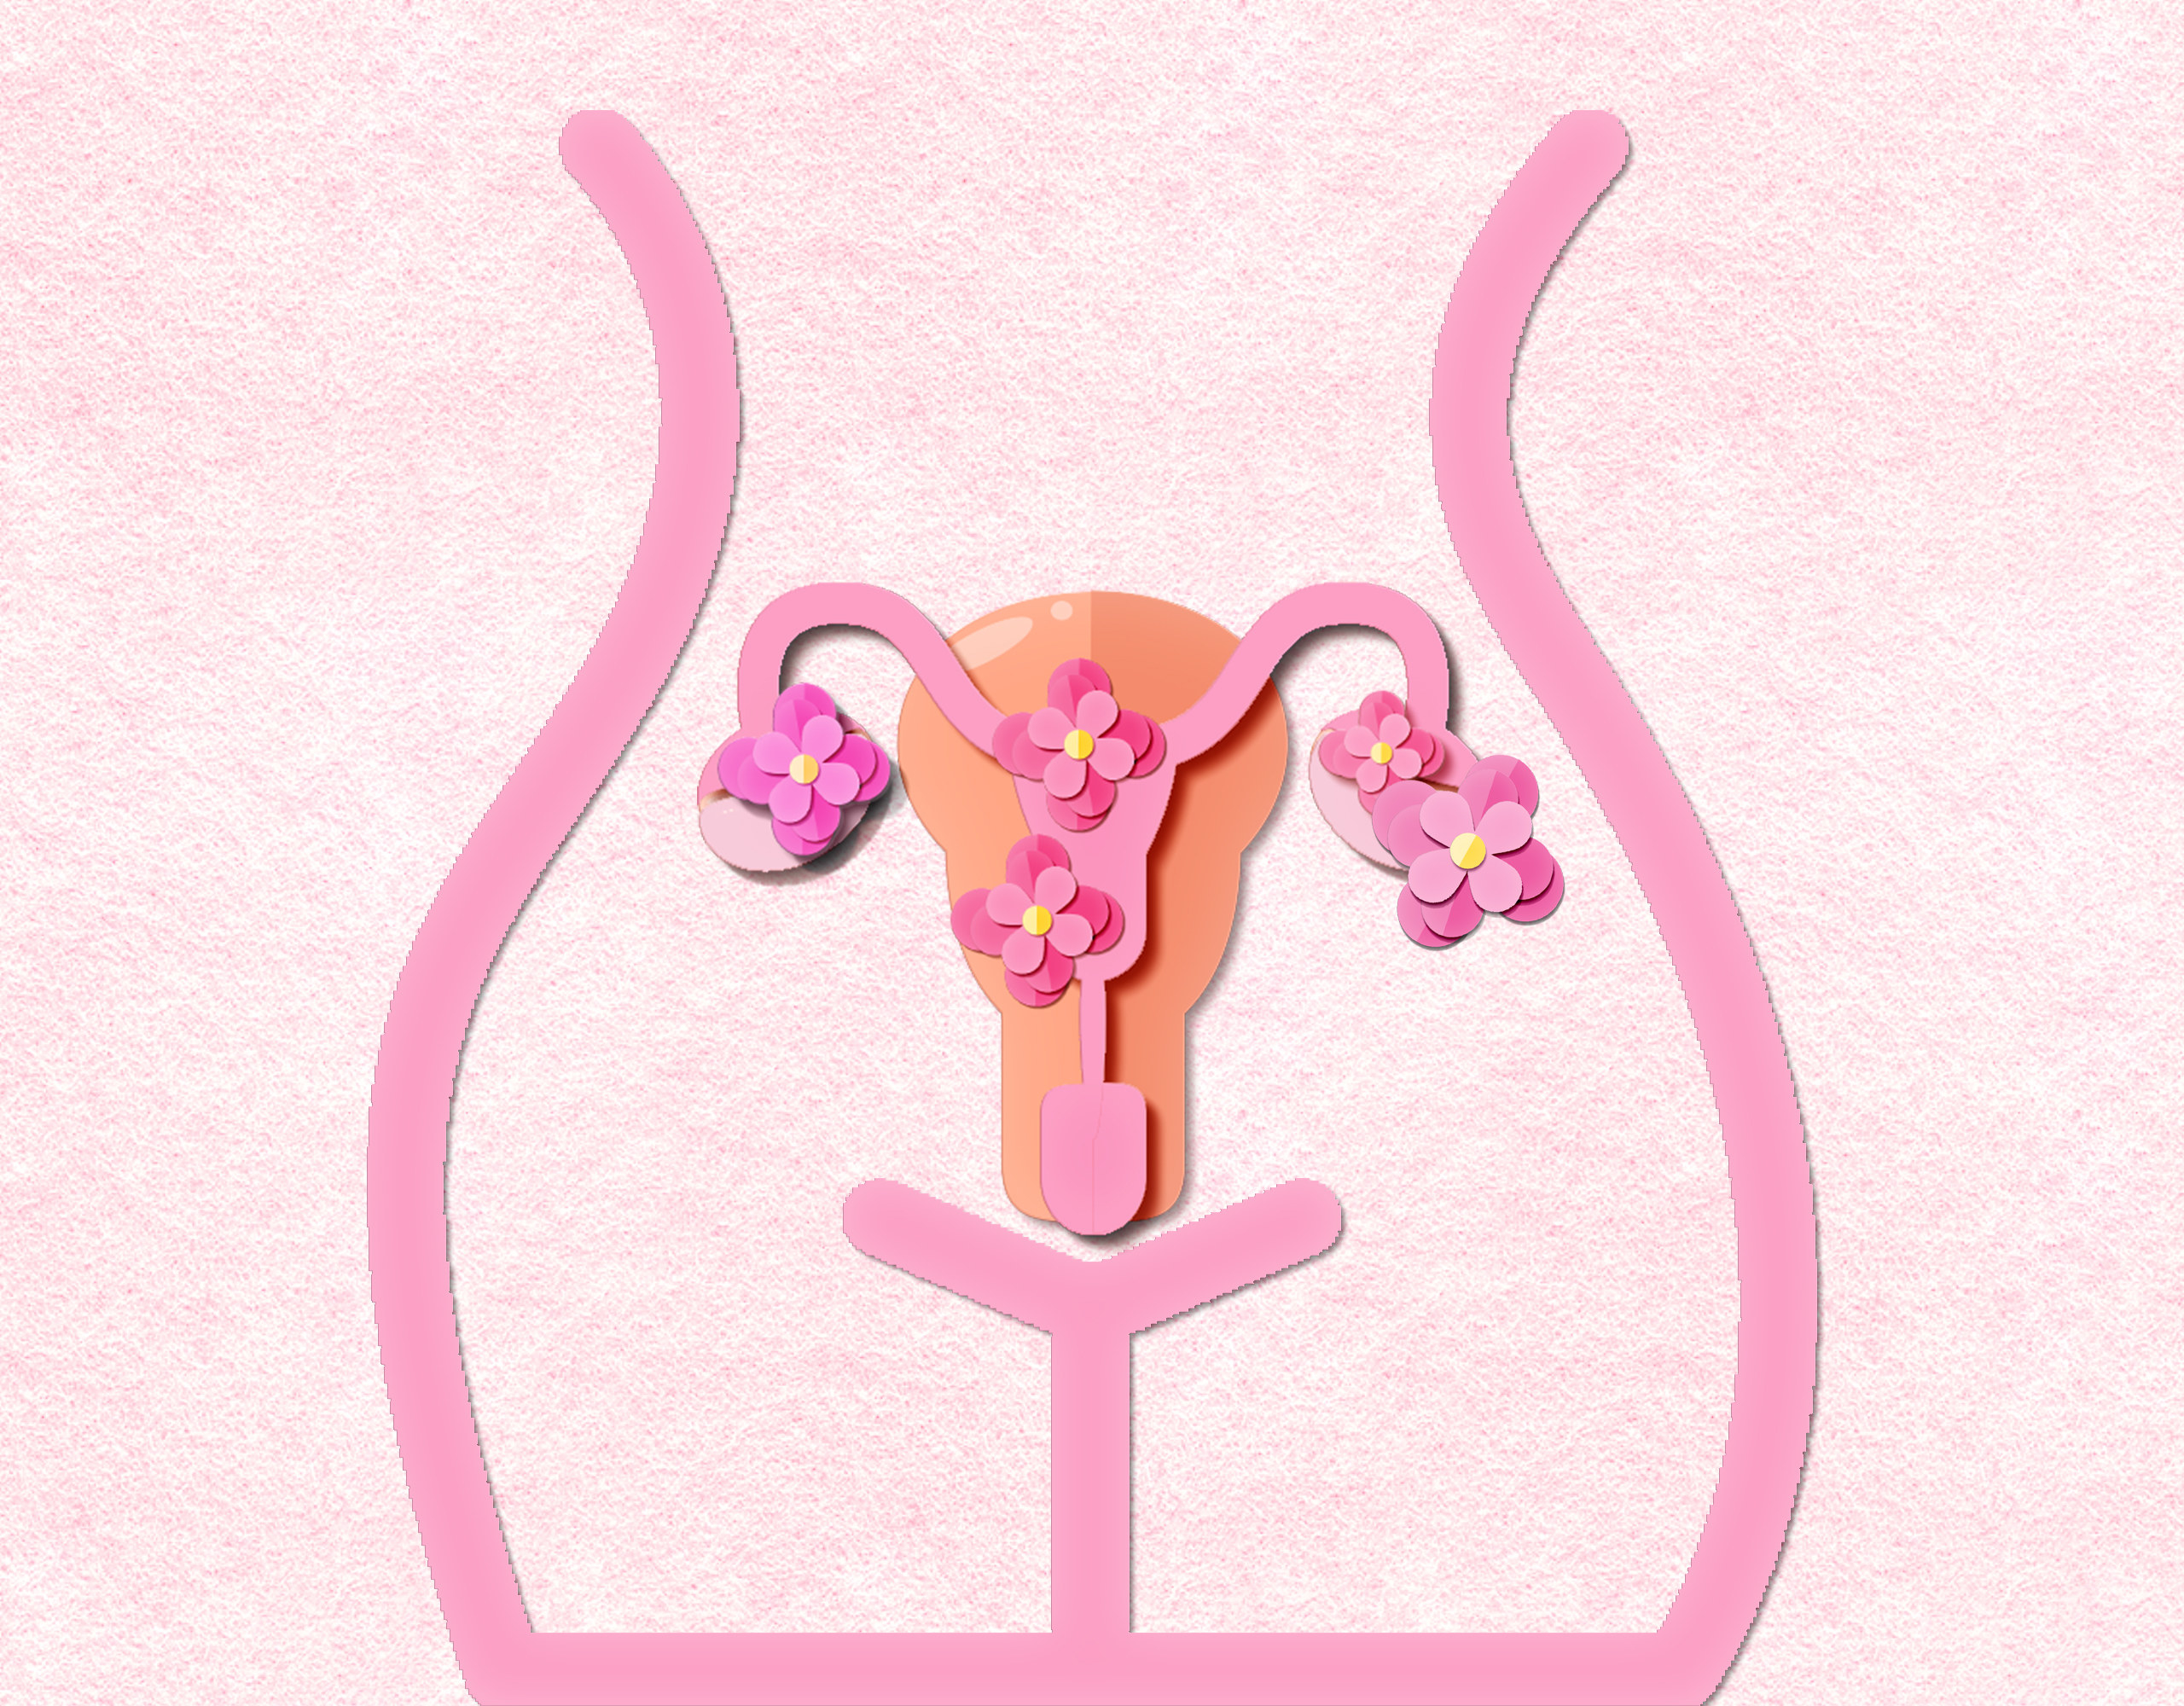 A drawn image of the uterus and ovaries